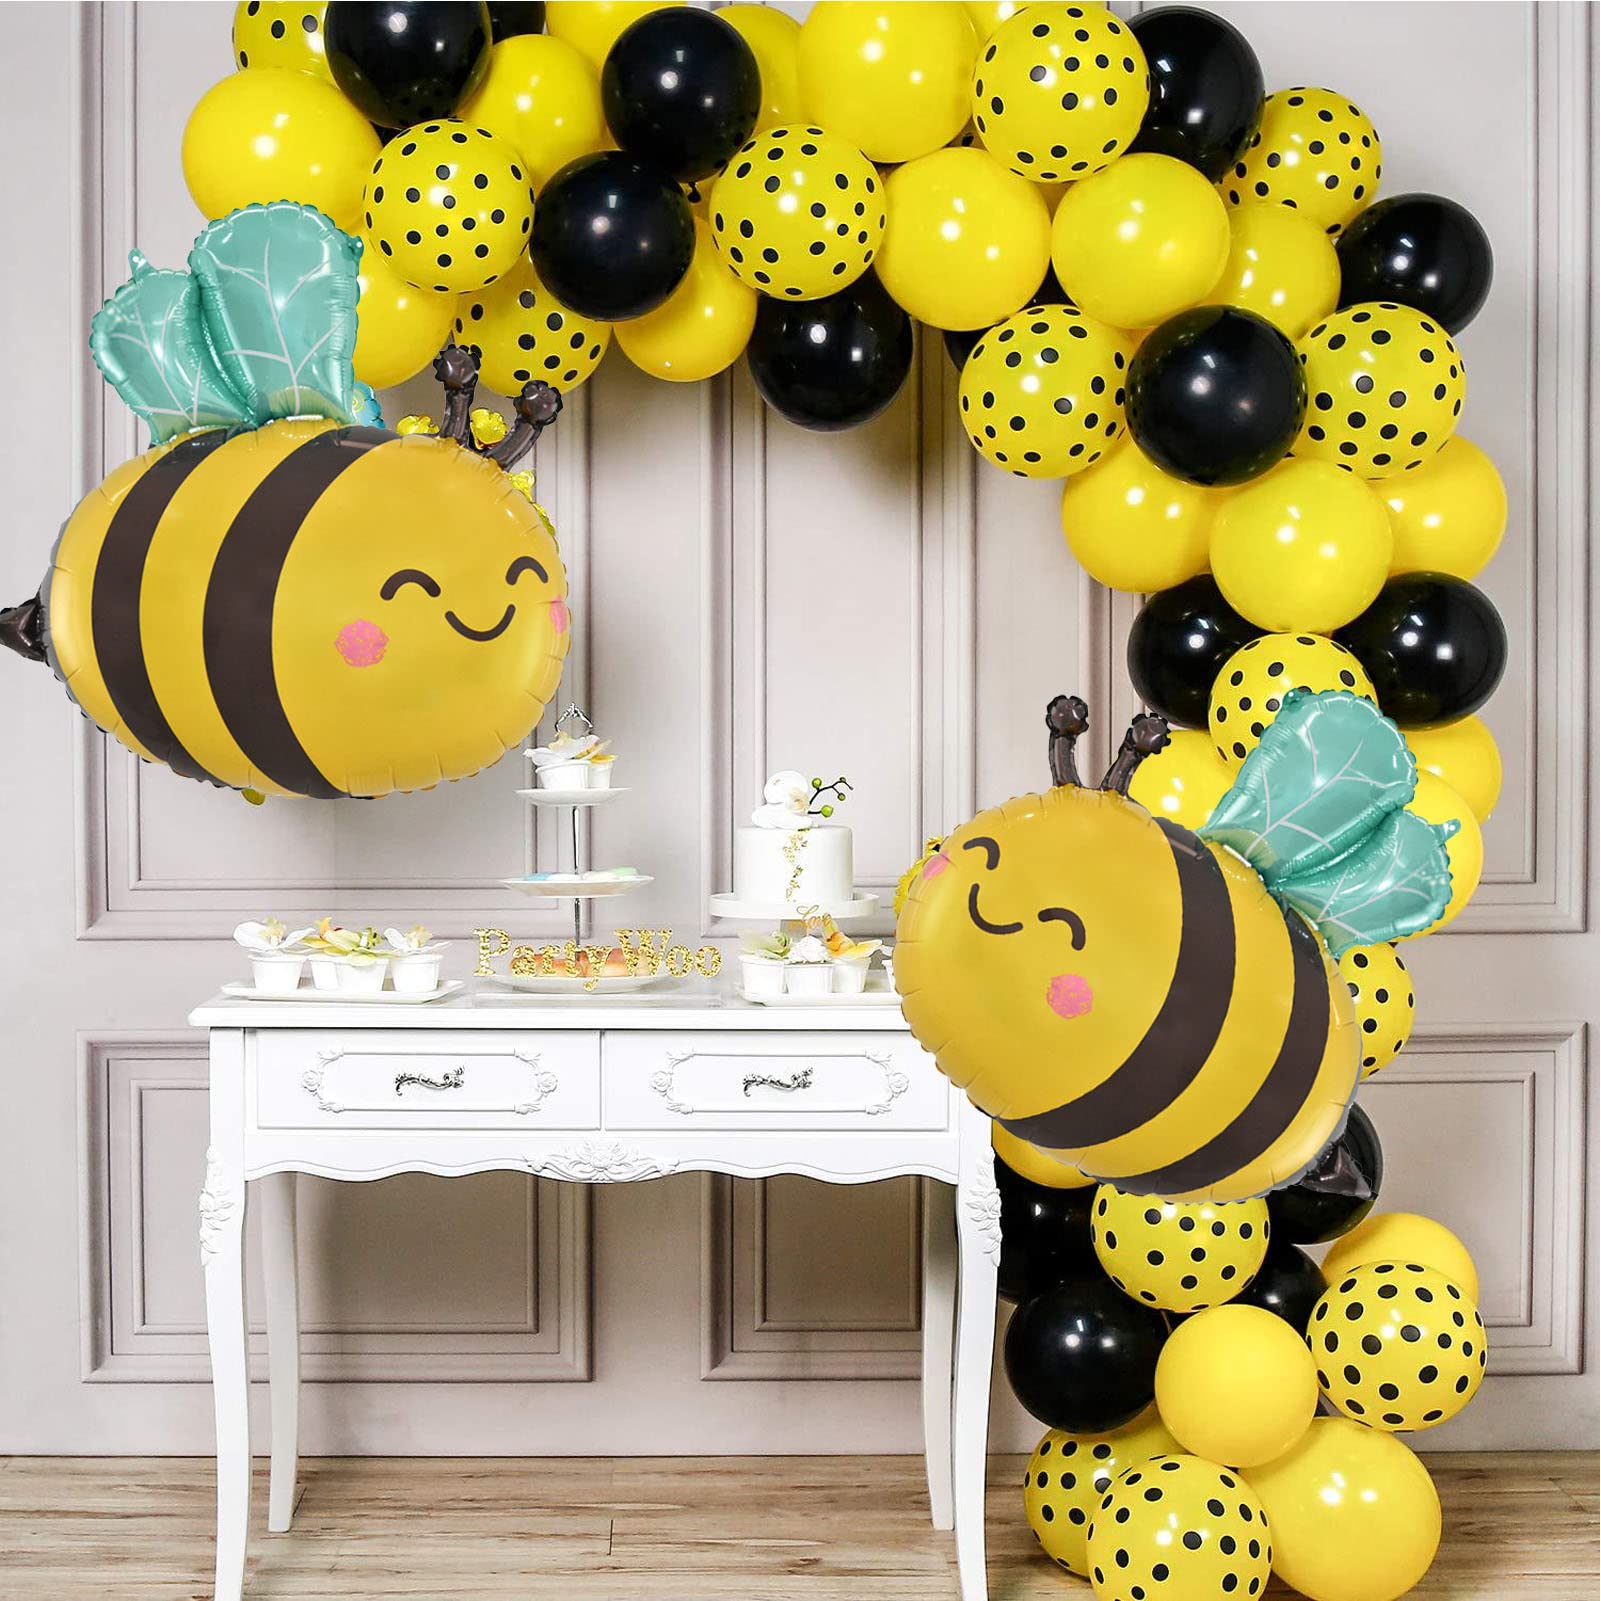 Bee Balloons Bee Birthday Party Decorations Supplies for Wedding Birthday Bee Theme Party Baby Shower, 4 Pack